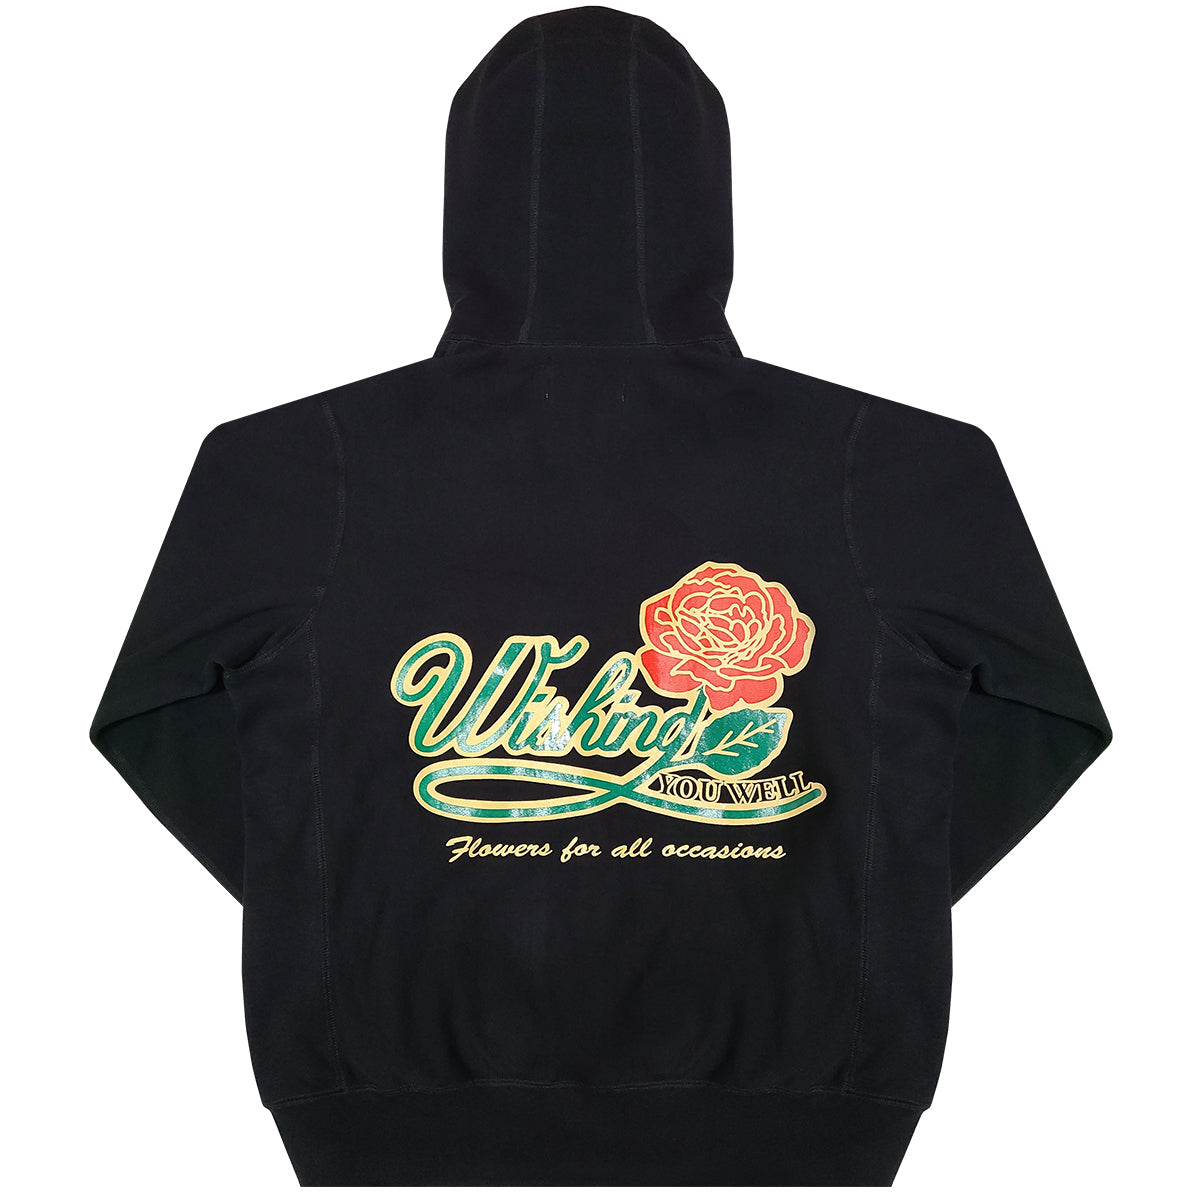 "FLOWERS FOR ALL OCCASIONS" ZIP HOODED SWEATSHIRT